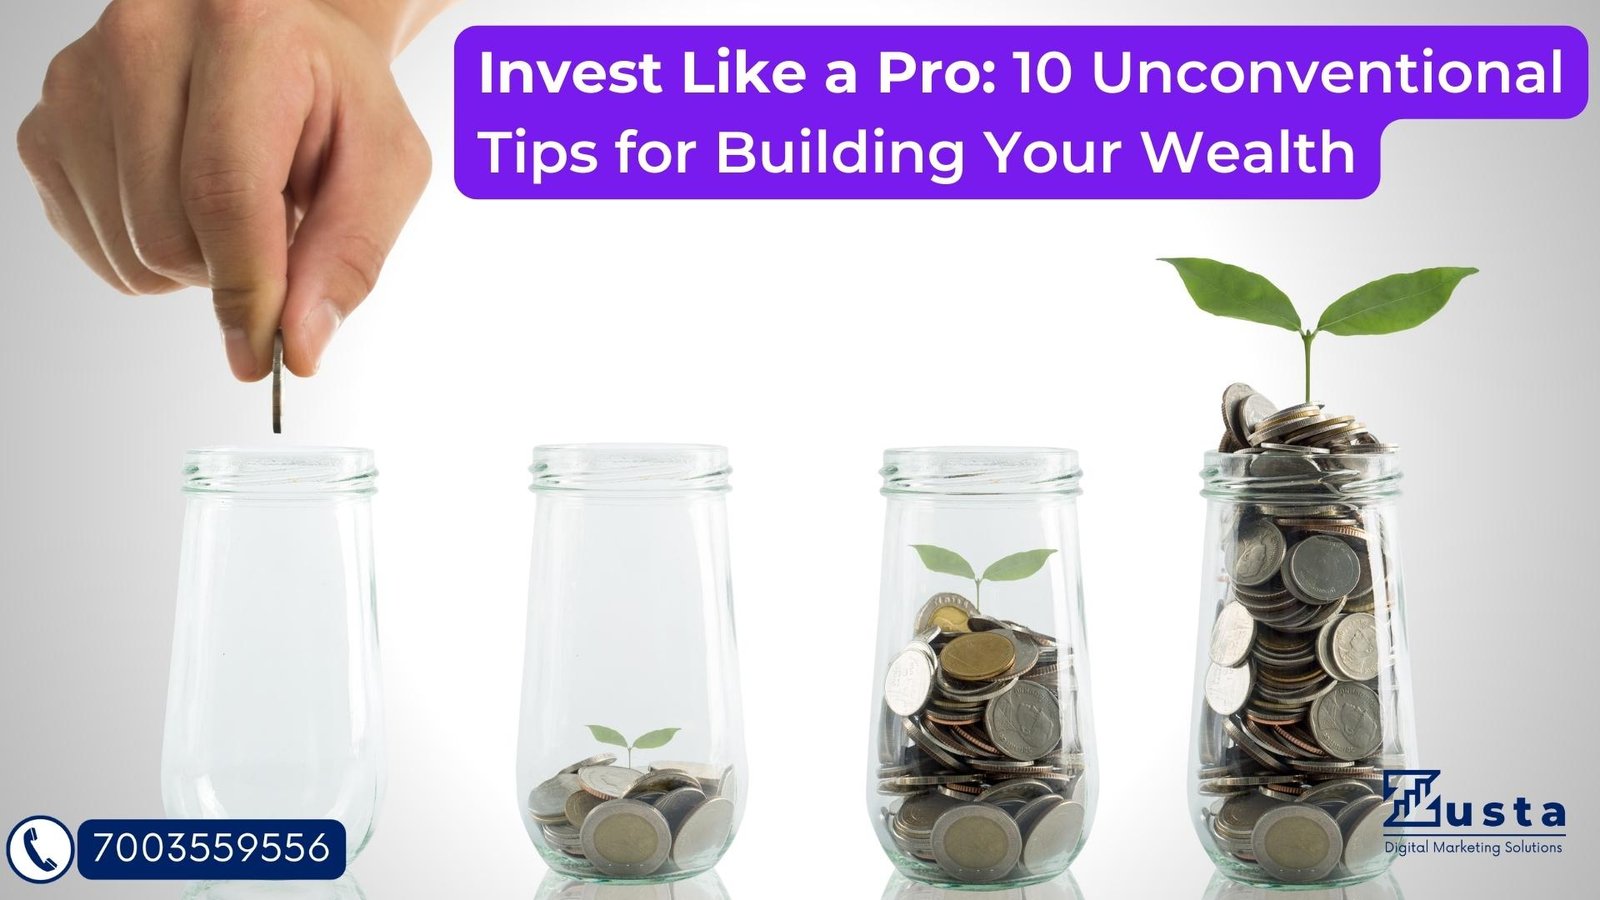 Invest Like a Pro: 10 Unconventional Tips for Building Your Wealth